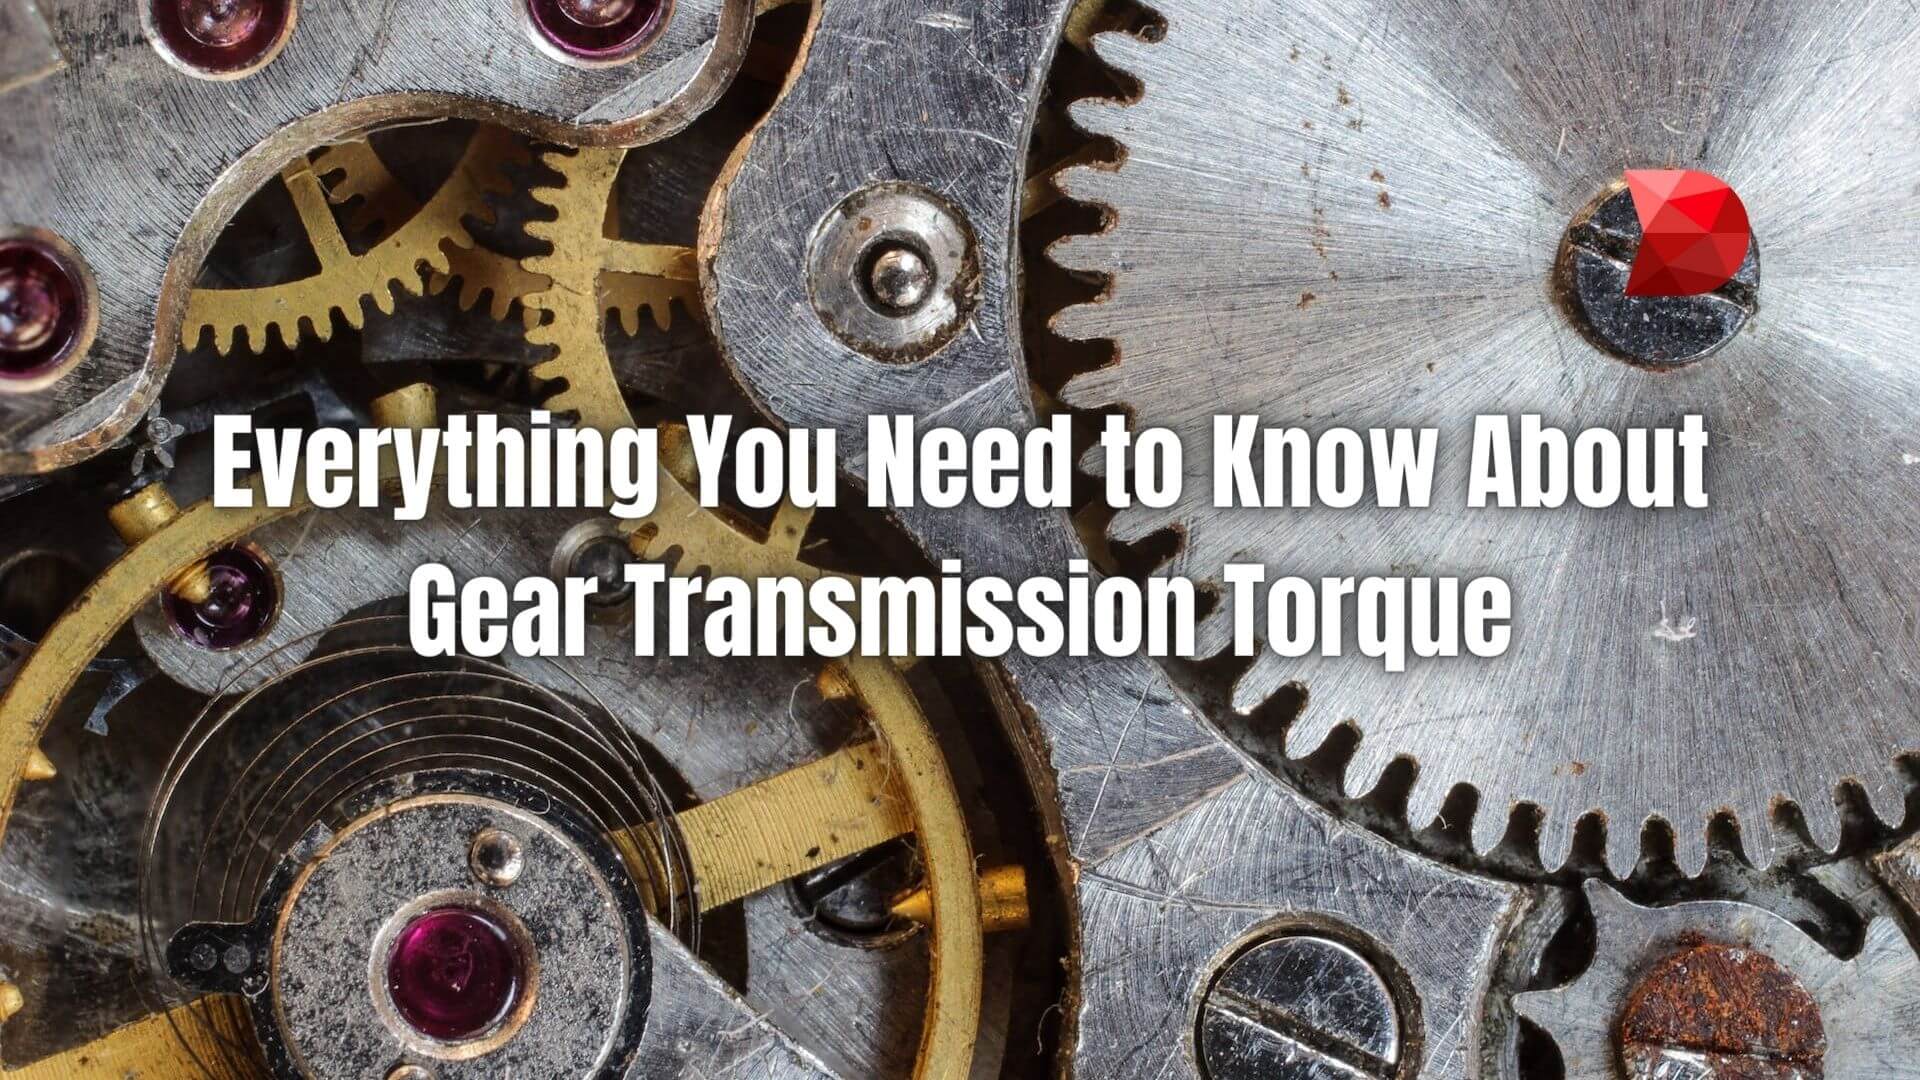 Gear Transmission Torque: What You Need to Know - DataMyte